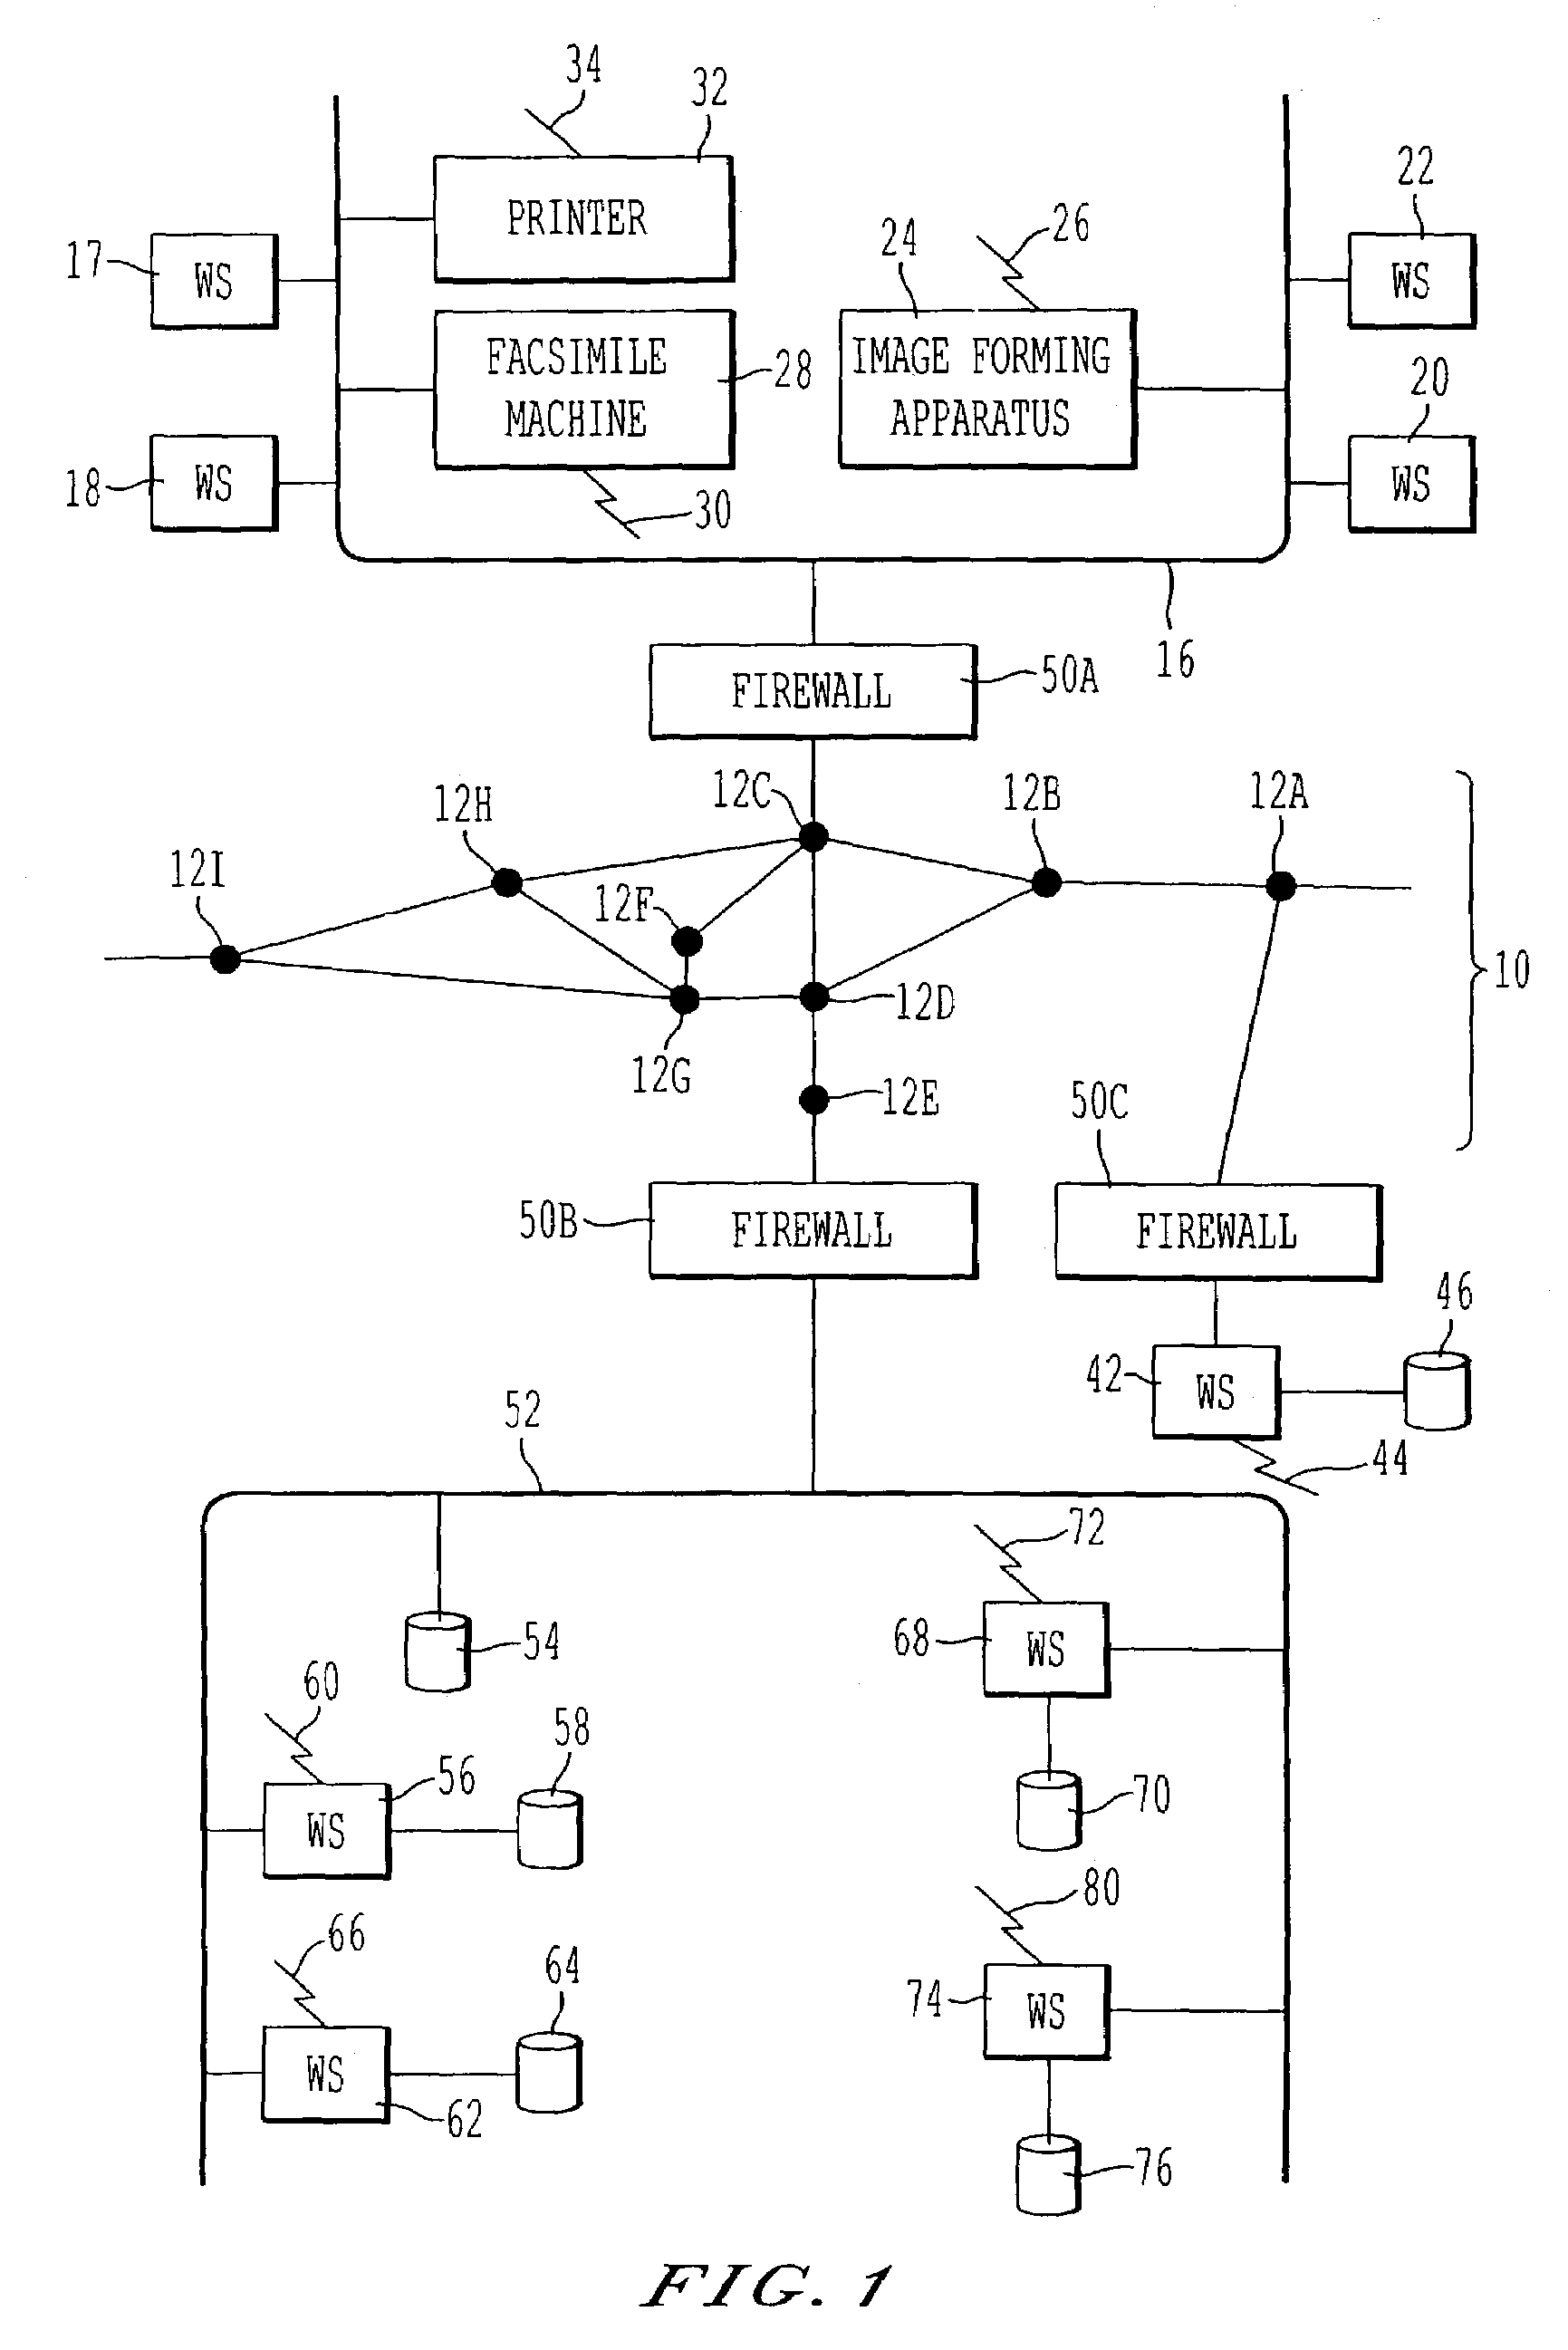 Method and system for using data structures to store database information for multiple vendors and model support for remotely monitored devices